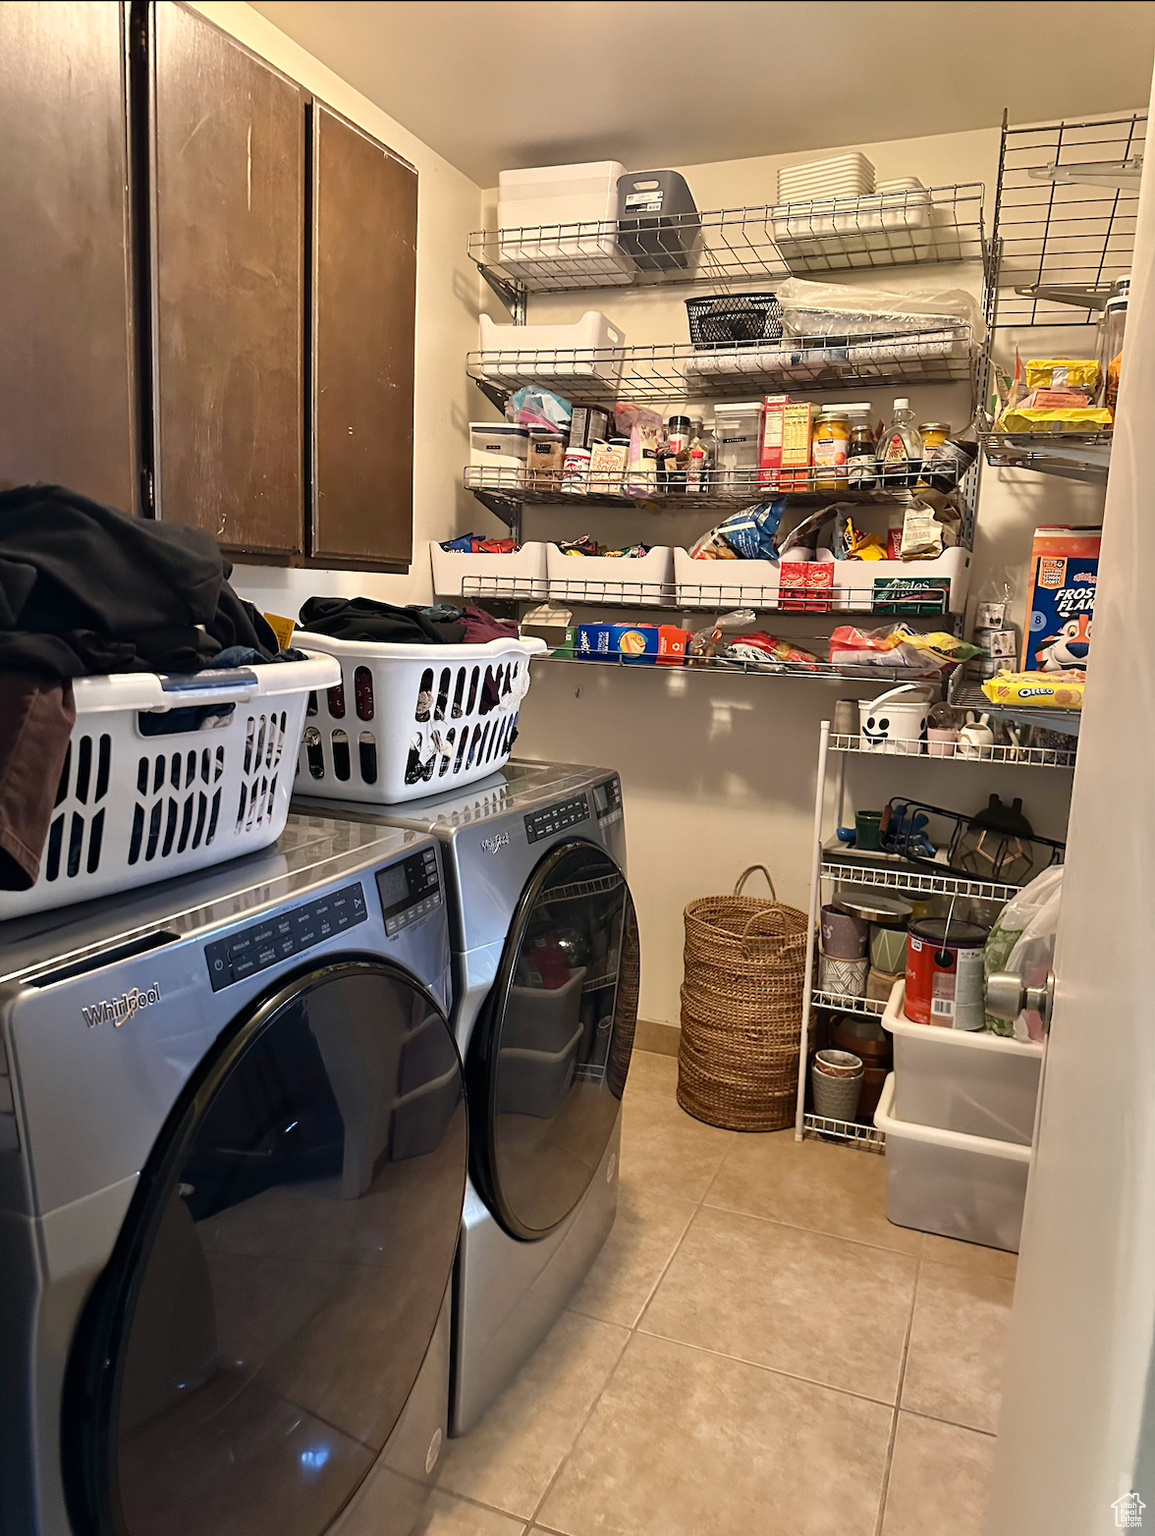 Clothes washing area featuring independent washer and dryer and light tile floors